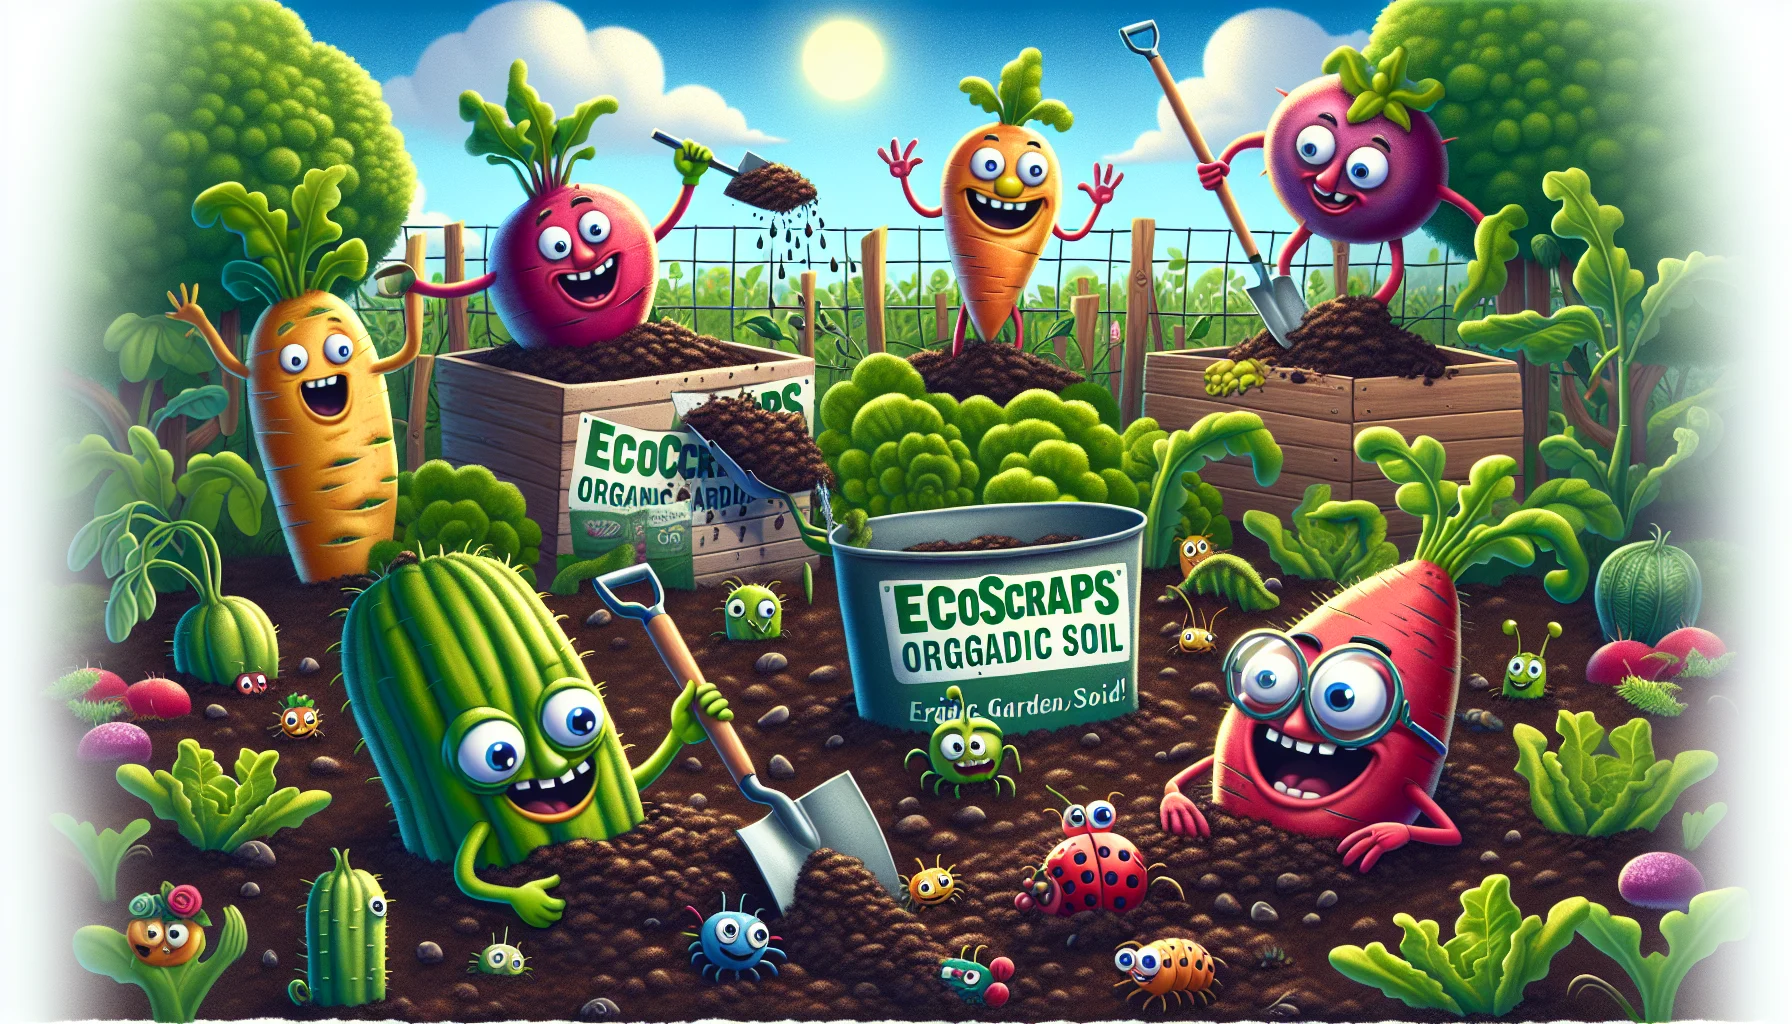 An amusing scene featuring Ecoscraps Organic Garden Soil. Picture a vibrant, lush garden teeming with eccentric, oversized vegetables that have quirky, anthropomorphic faces. They are joyously 'working' in the garden, tending to the smaller plants, watering them, and excitedly shoveling the rich, dark Ecoscraps Organic Garden Soil. Delightfully bizarre bugs like a caterpillar with reading glasses are buried up to their necks in the soil, seemingly enjoying a 'soil spa'. This fun-filled scene encourages the joys of gardening in an unusually delightful way.